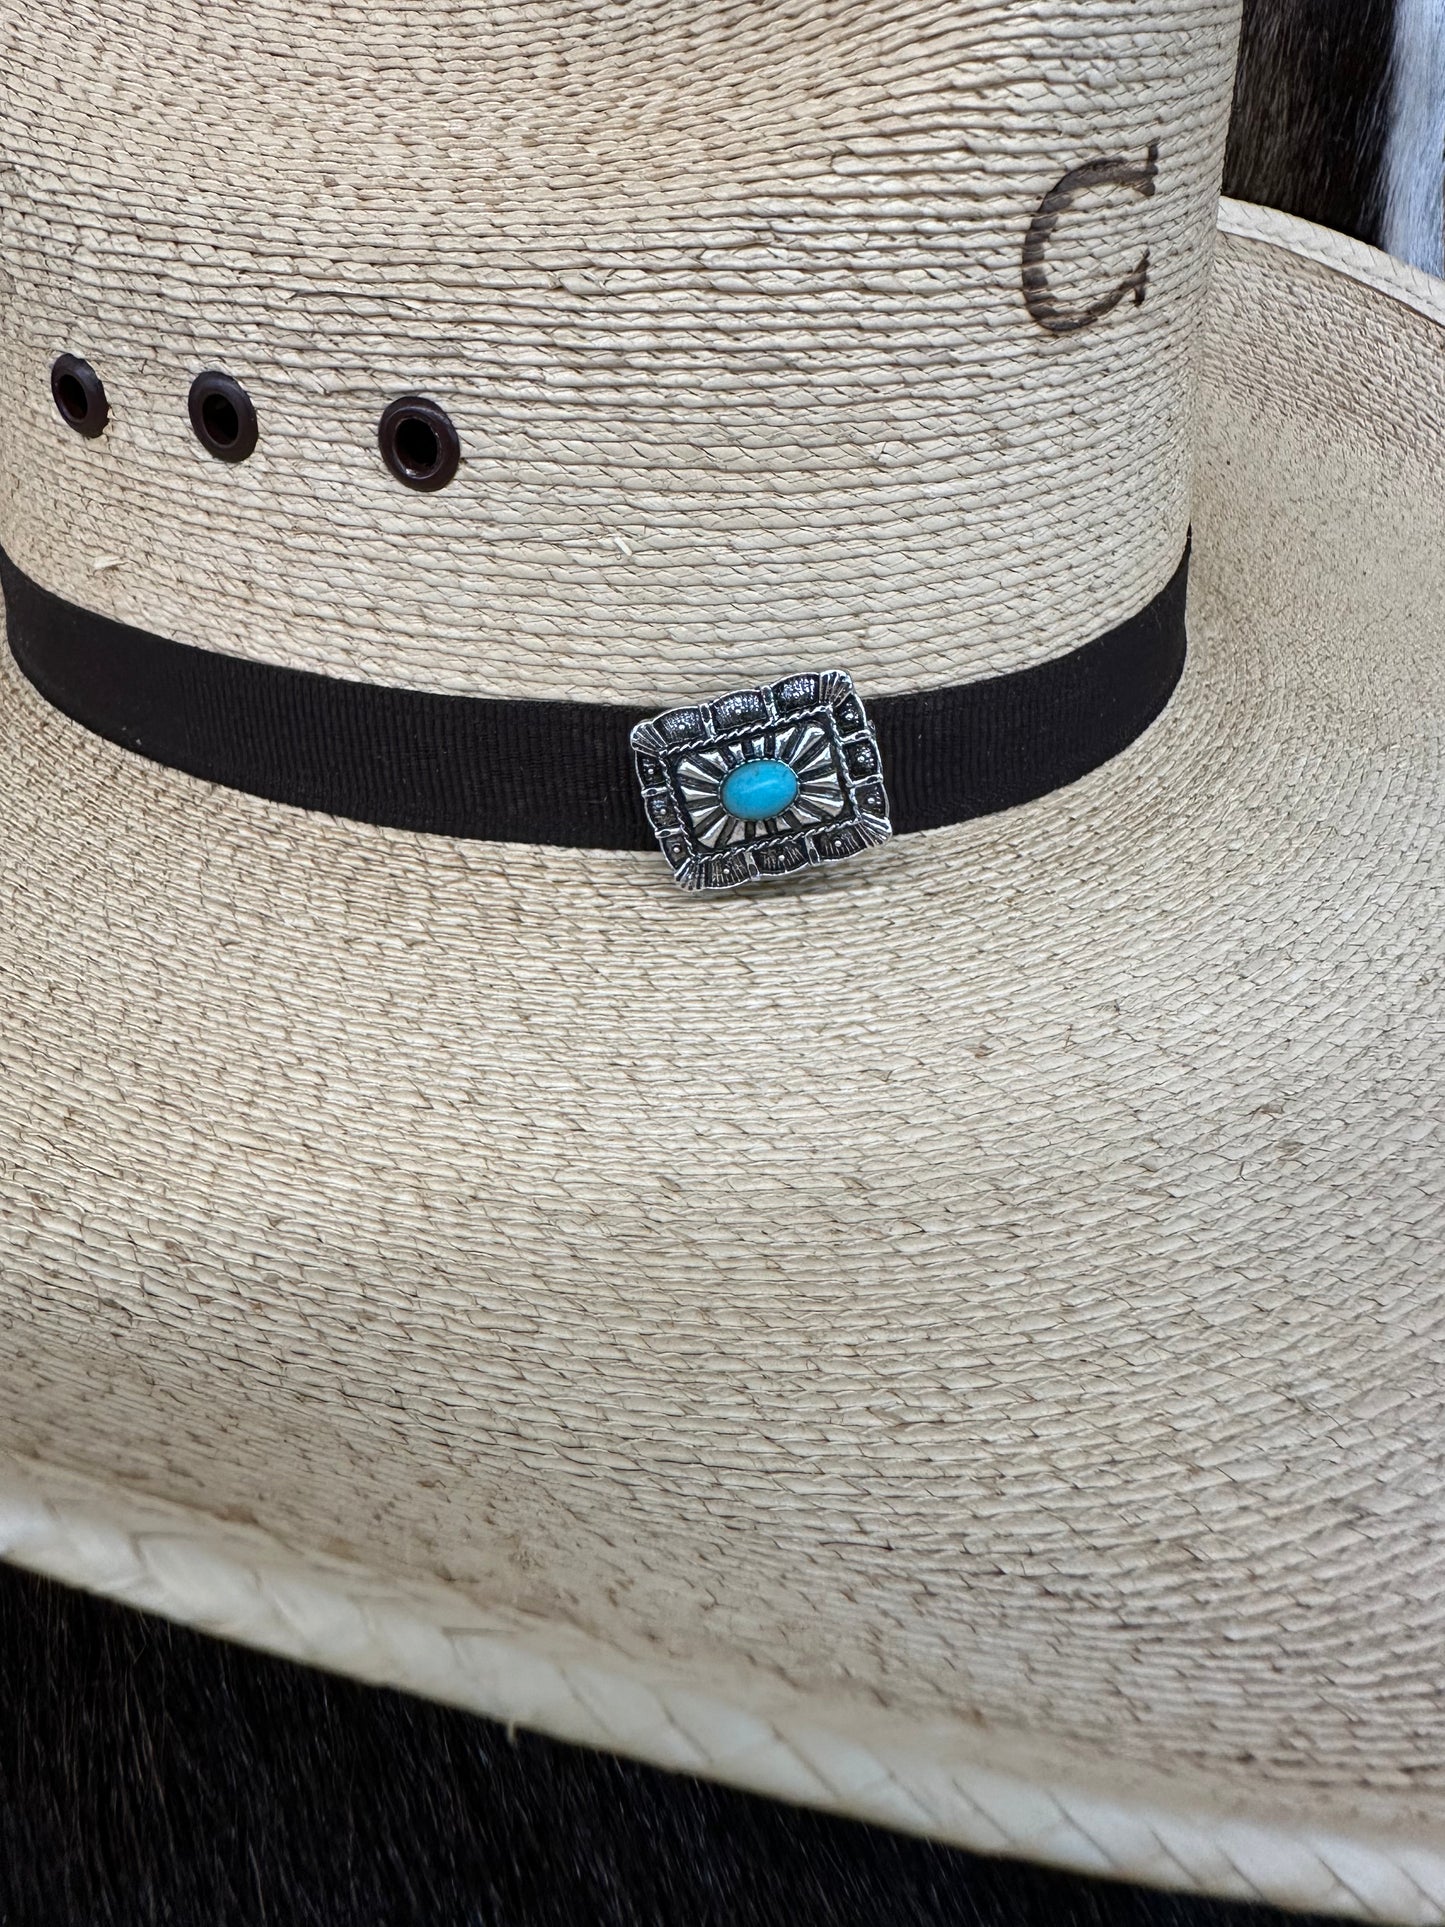 The Buckle Up Hat Pin